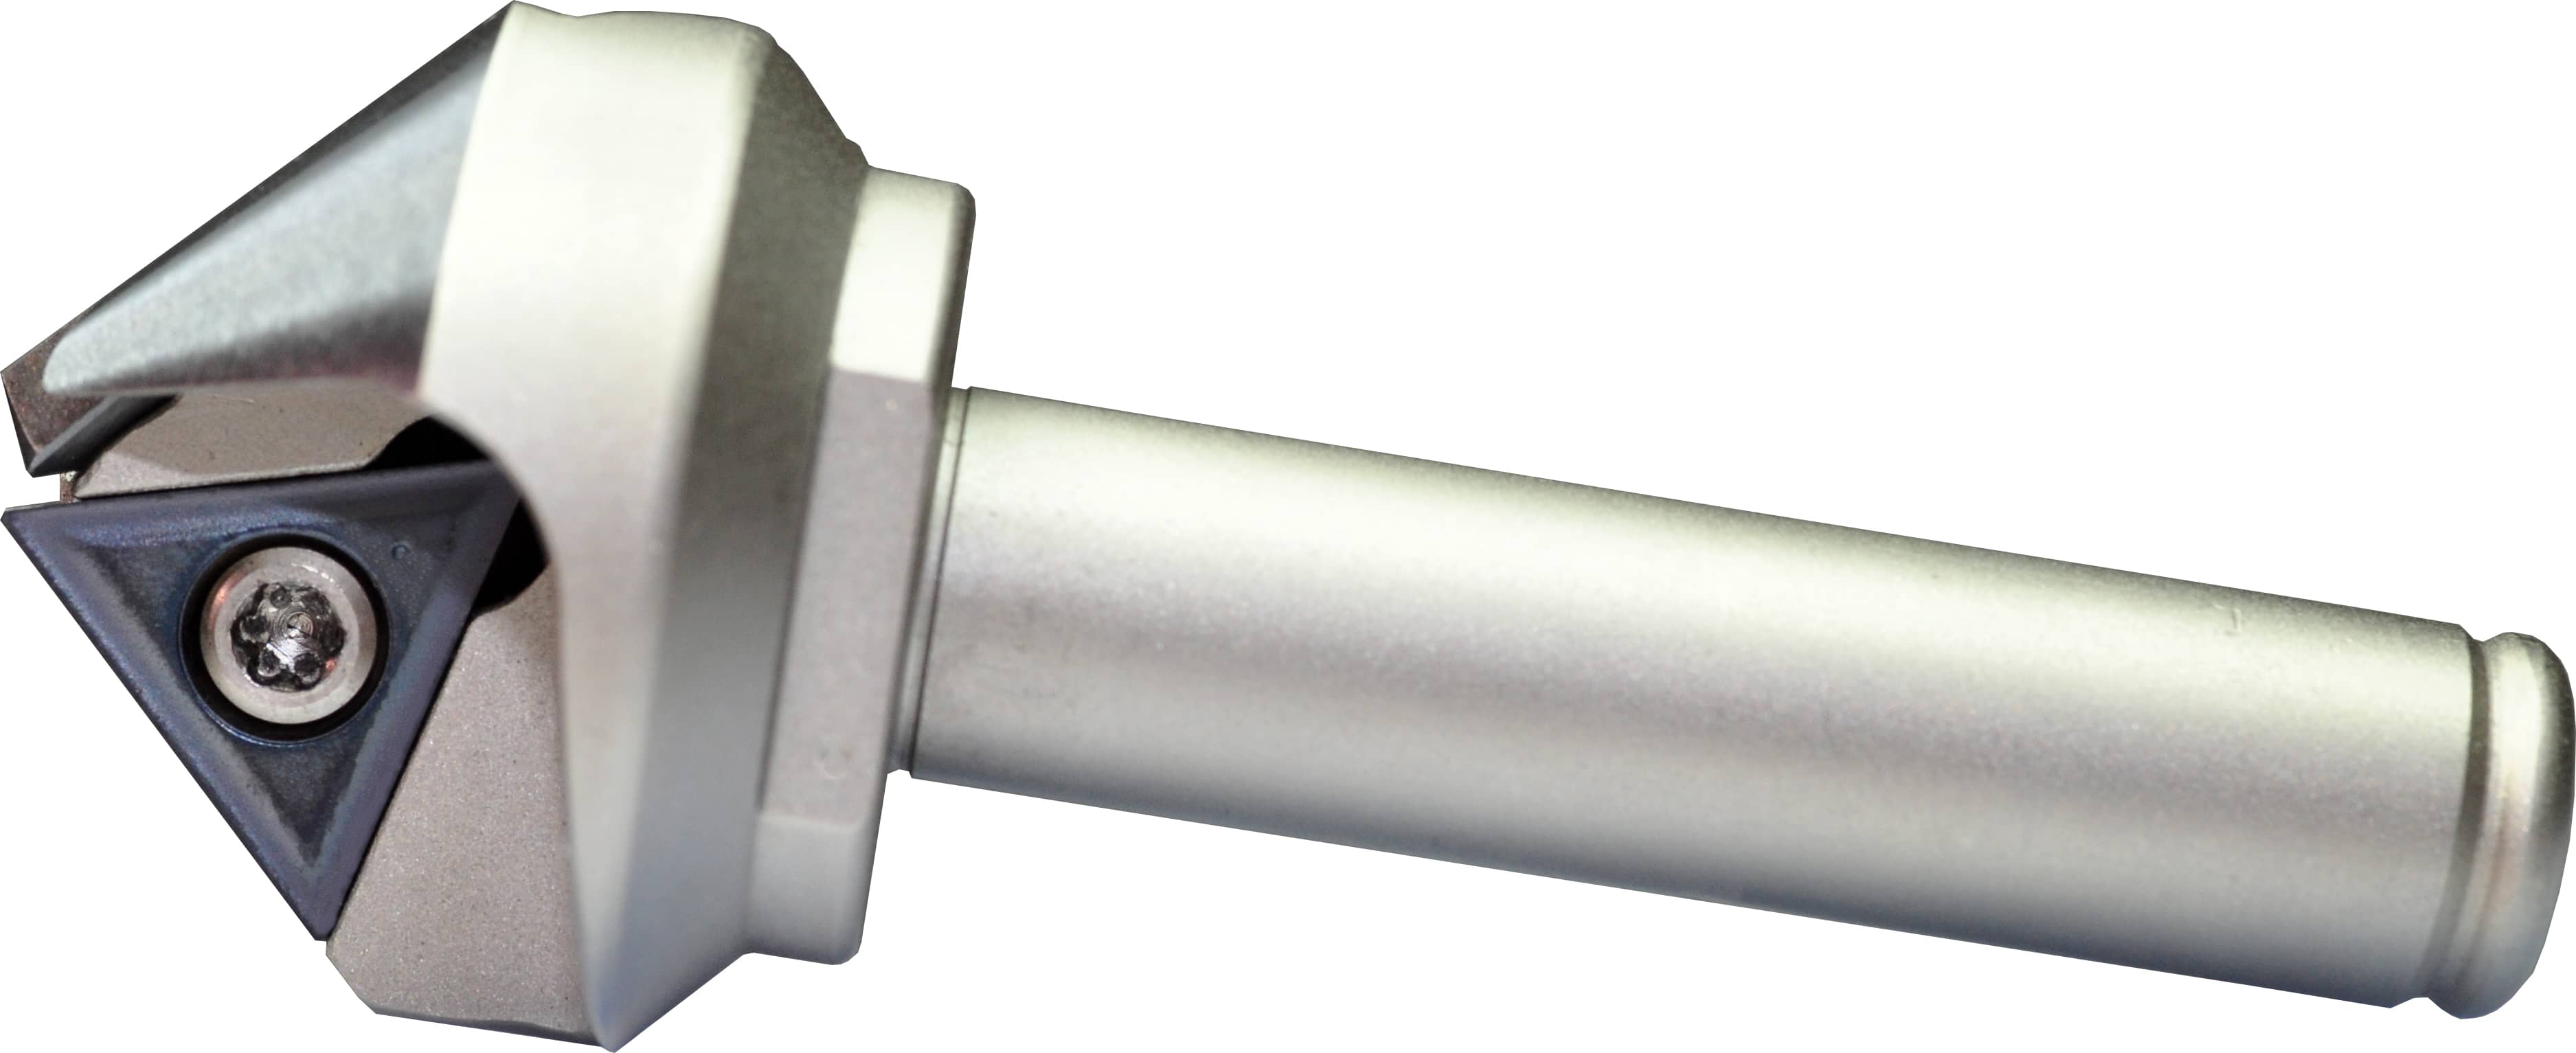 Products|CHAMFER TOOL FOR MANUAL BENCH DRILLING